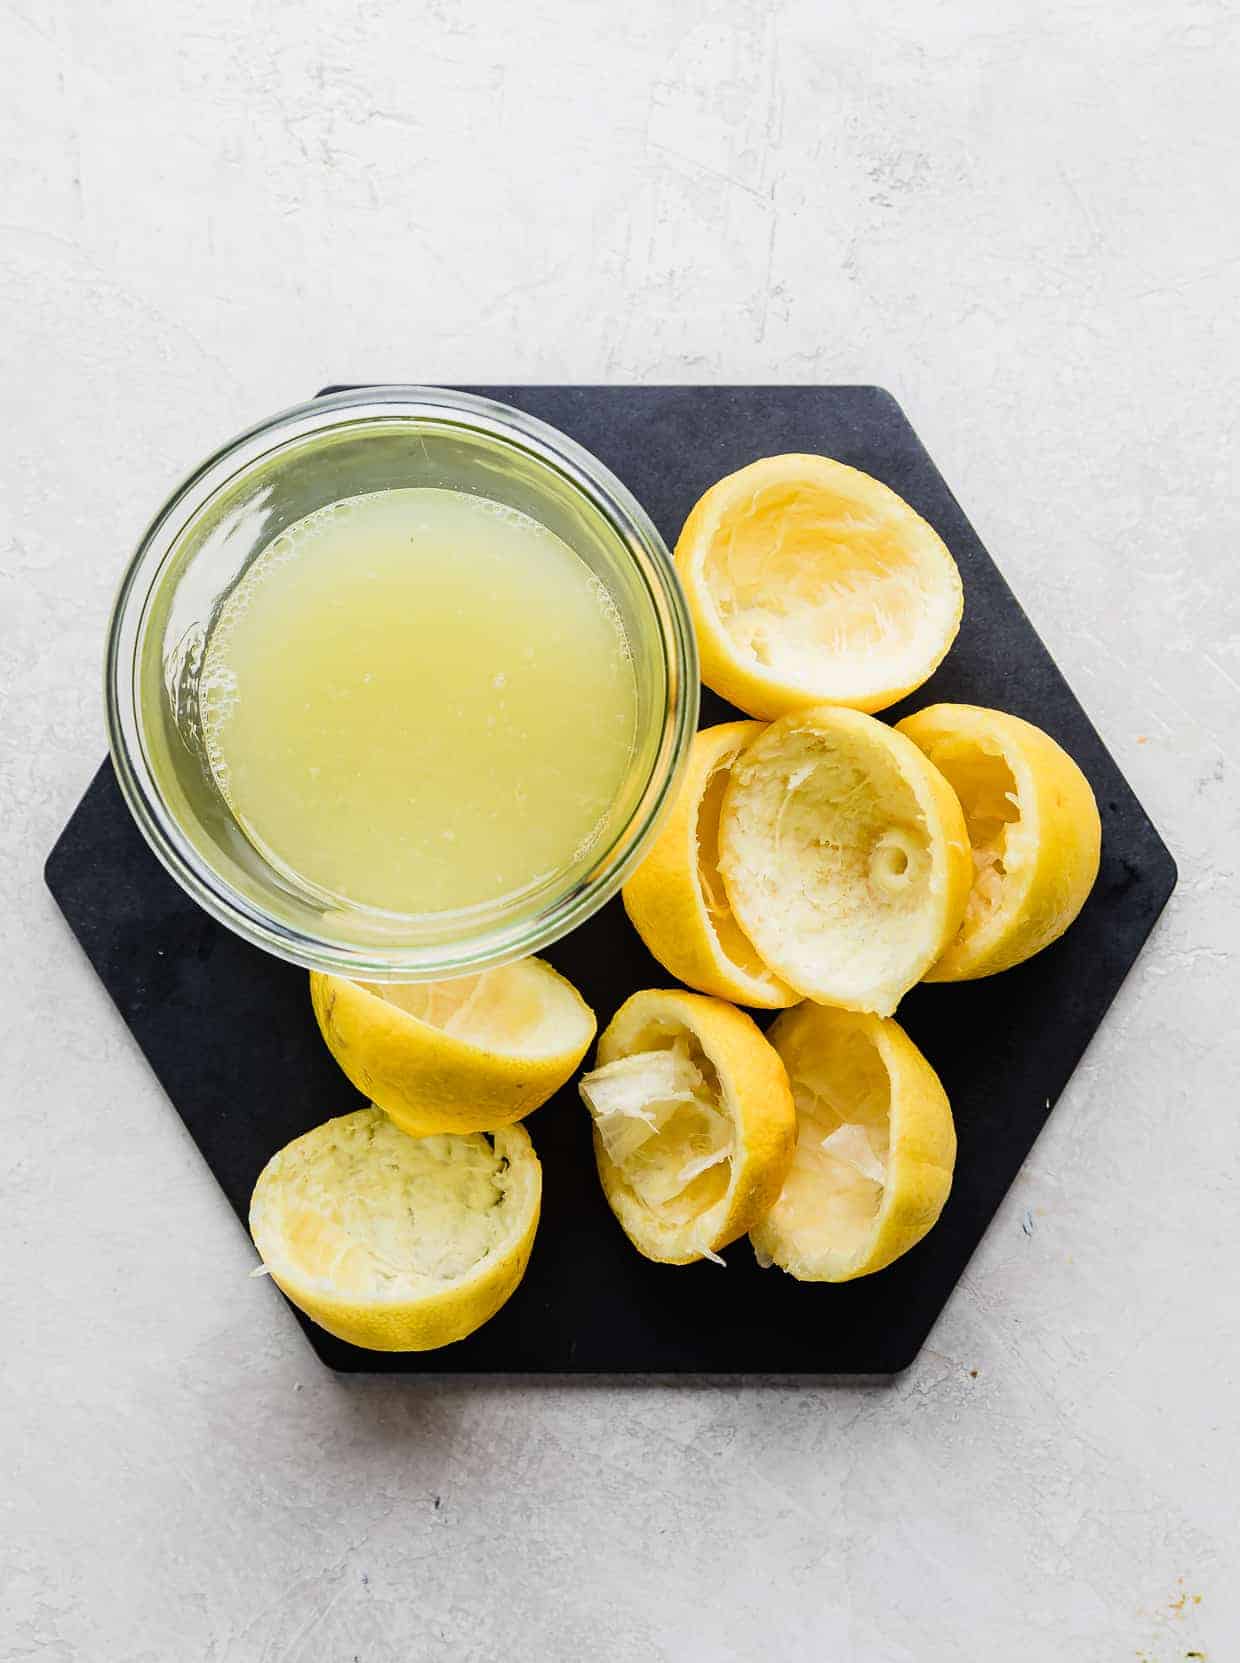 A jar of freshly squeezed lemon juice surrounded by squeezed lemons, on a black hexagon plate.